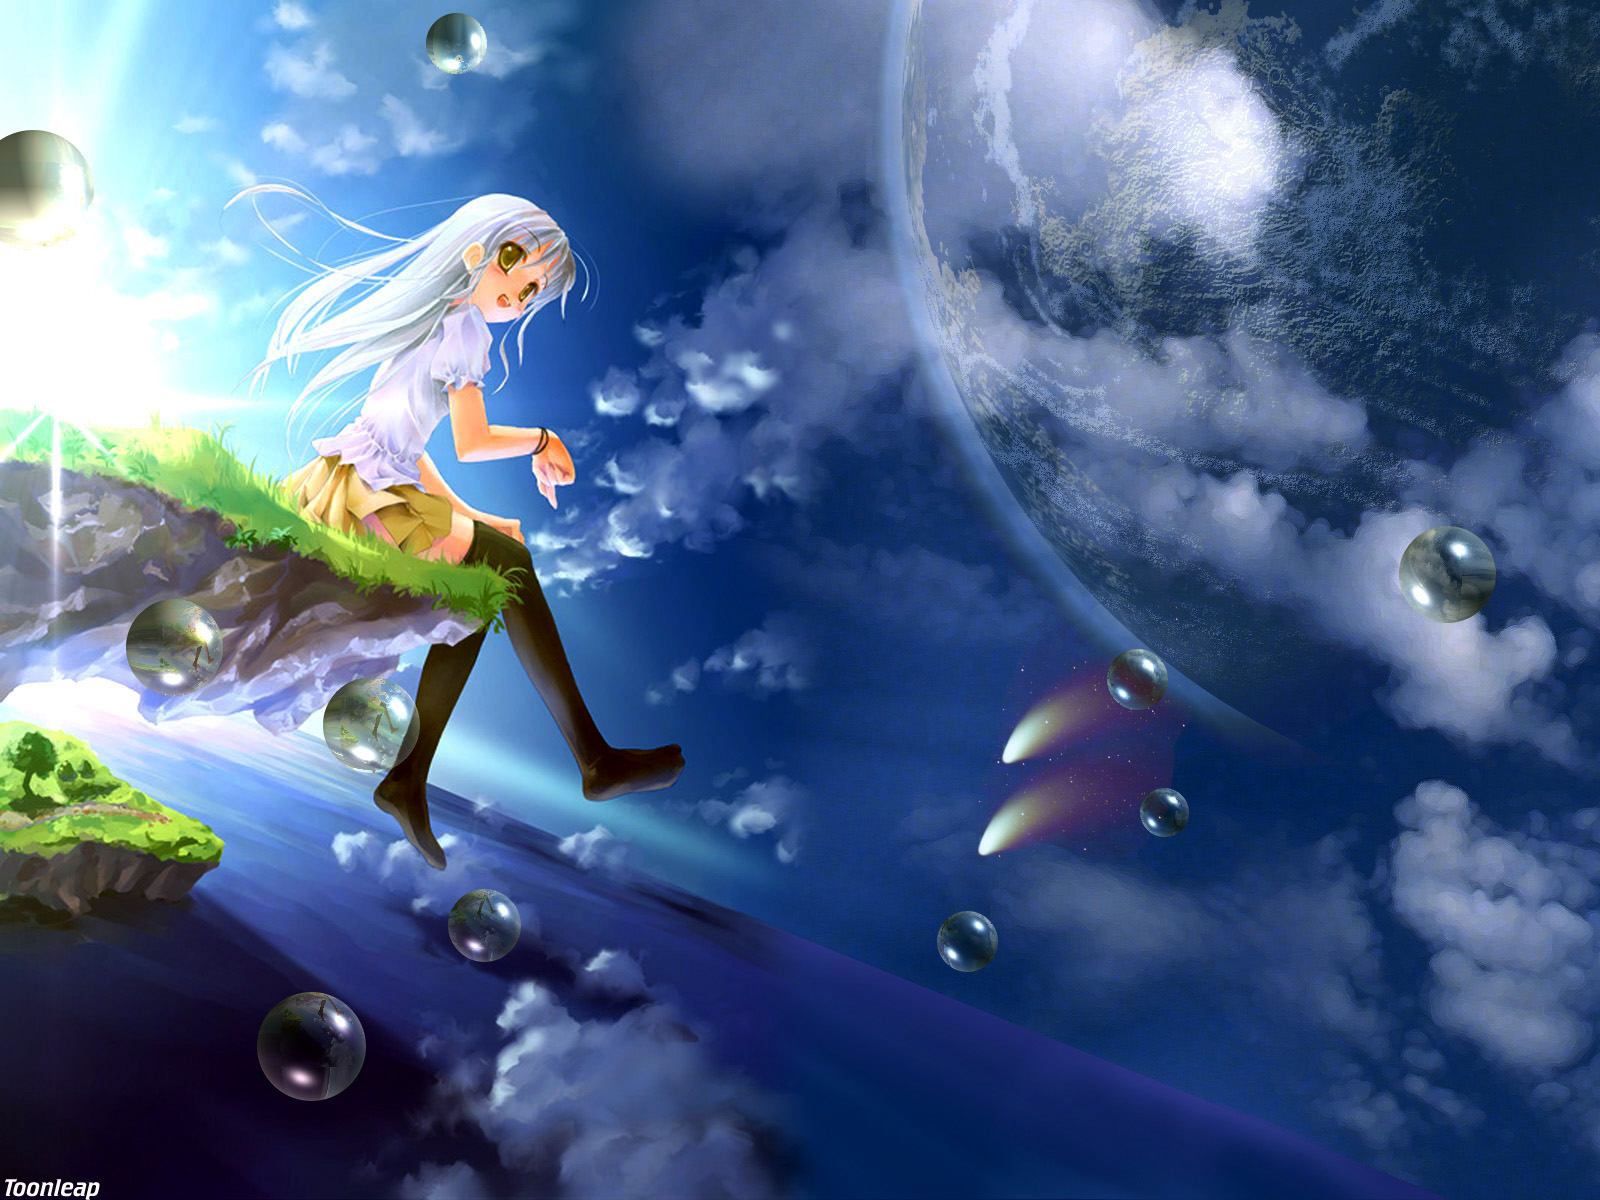 White-haired person standing under a beautiful sky